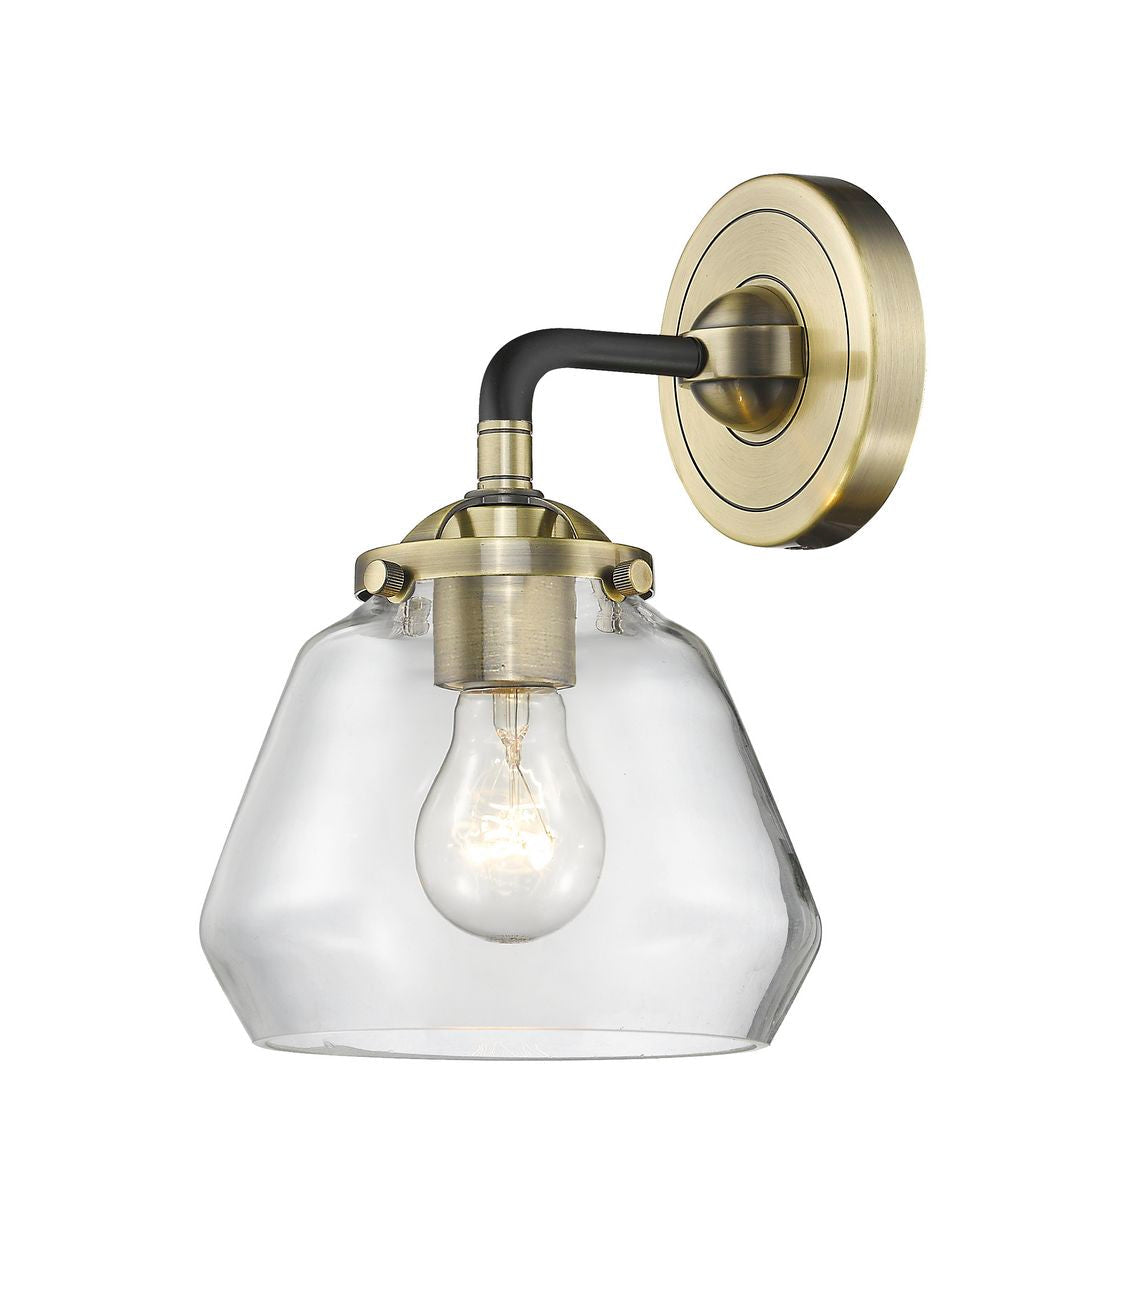 1-Light 6.75" Fulton Sconce - Cone Clear Glass - Choice of Finish And Incandesent Or LED Bulbs